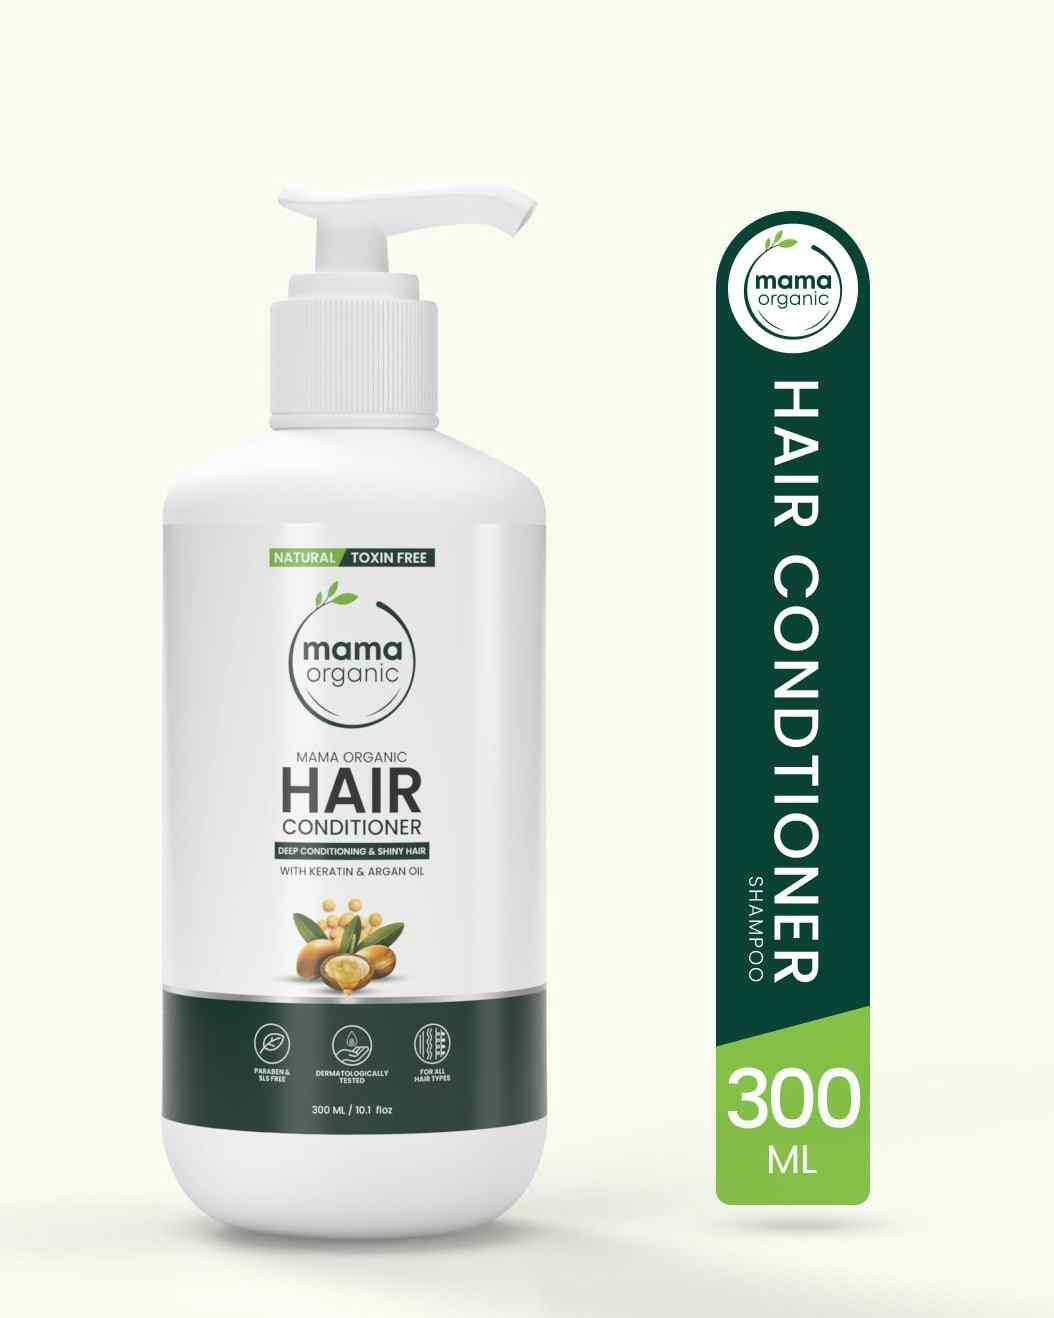 Mama Organic Hair Conditioner For Deep Conditioning & Shiny Hair | For Women & Men | Natural & Toxin-Free - 300ml